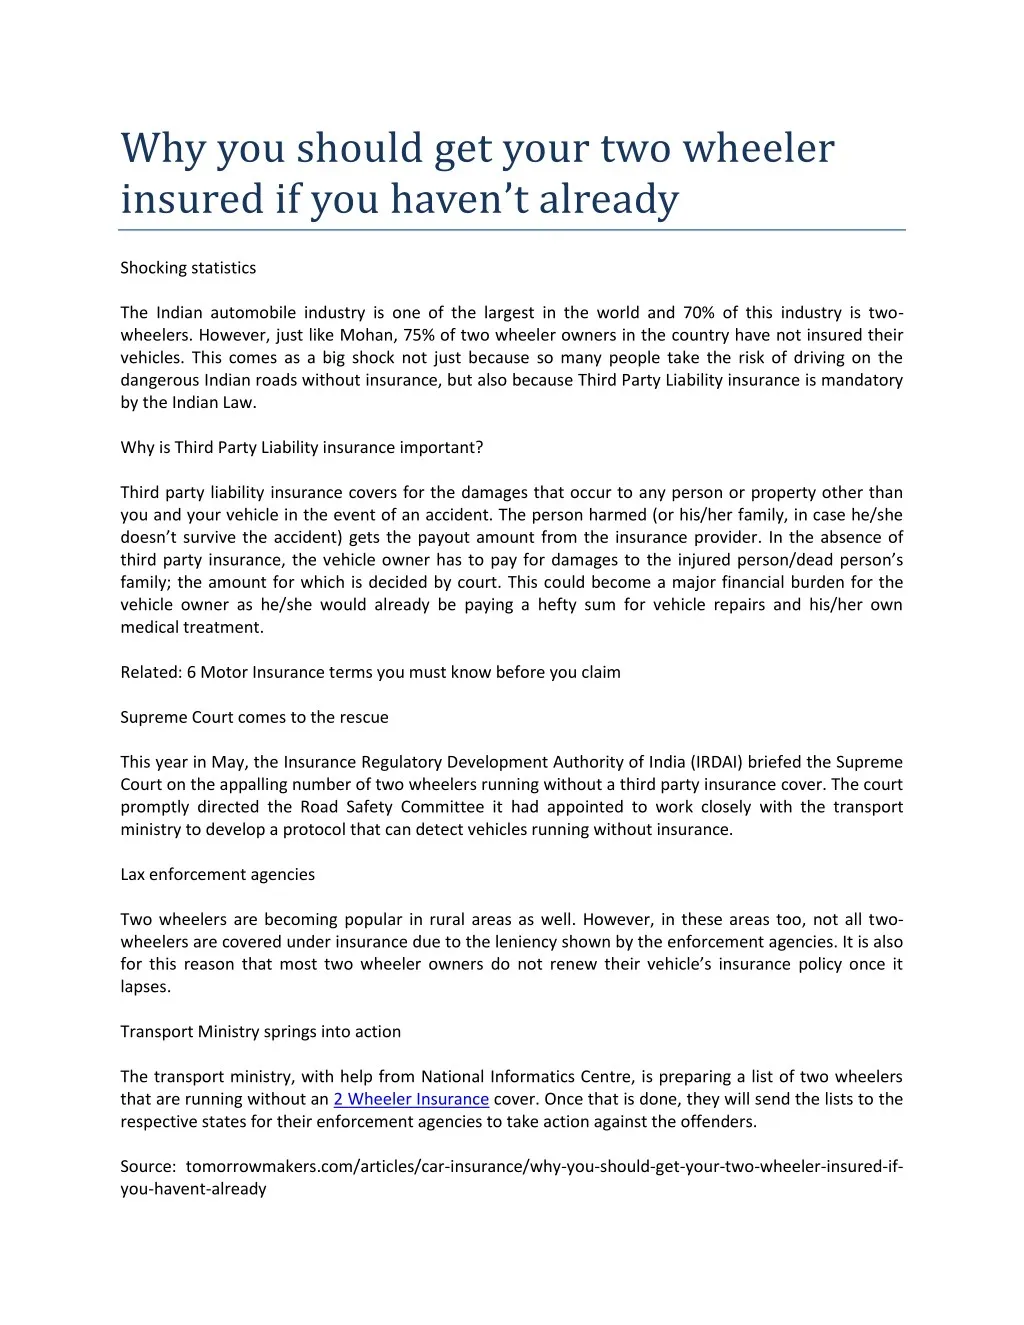 why you should get your two wheeler insured